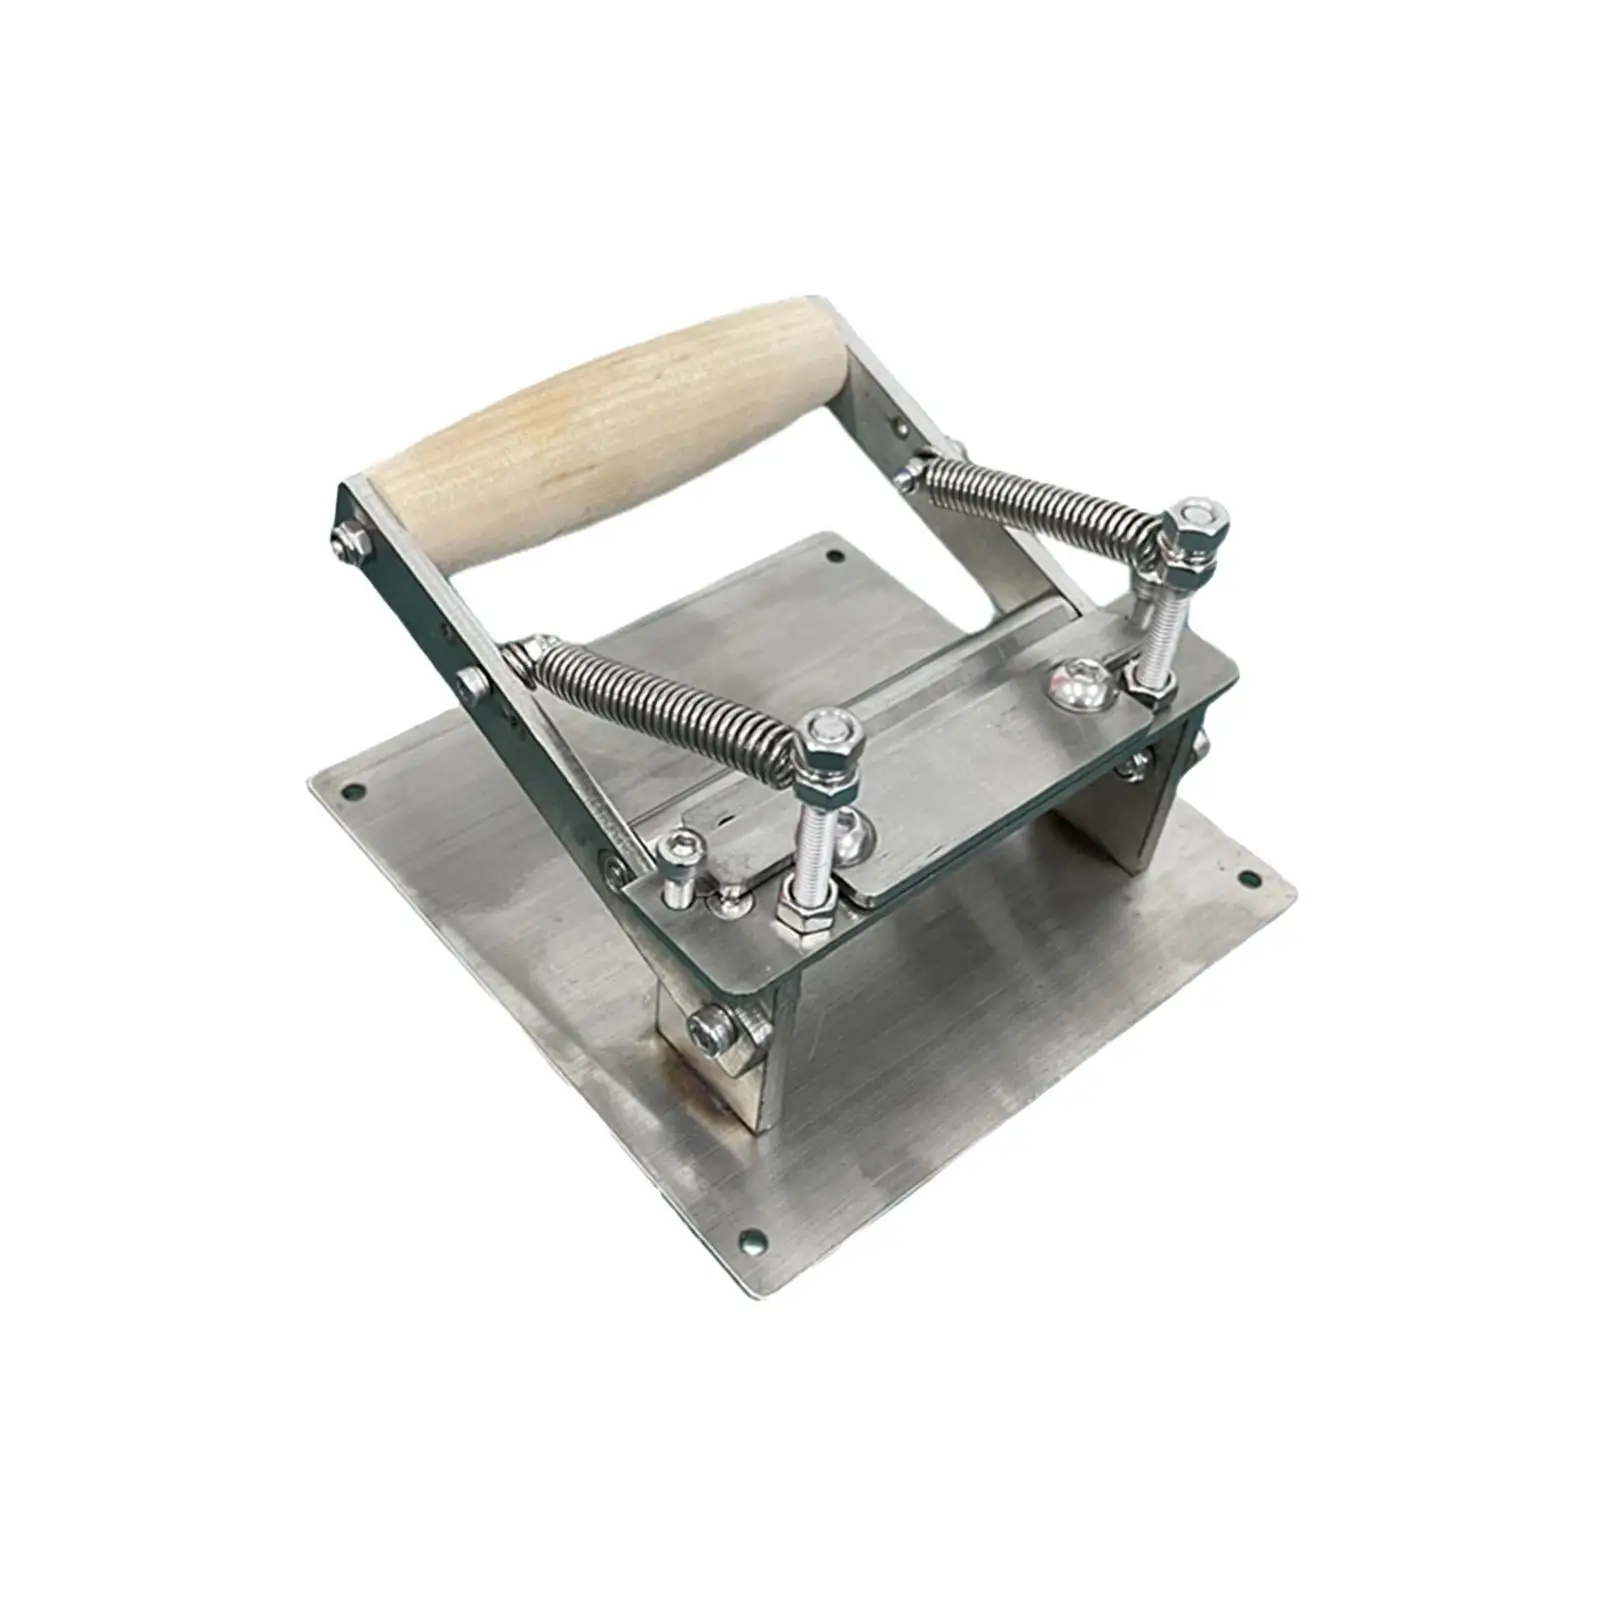 Manual Leather Thinning Machine Stainless Steel Leather Thinning Tool for Tanned Leather